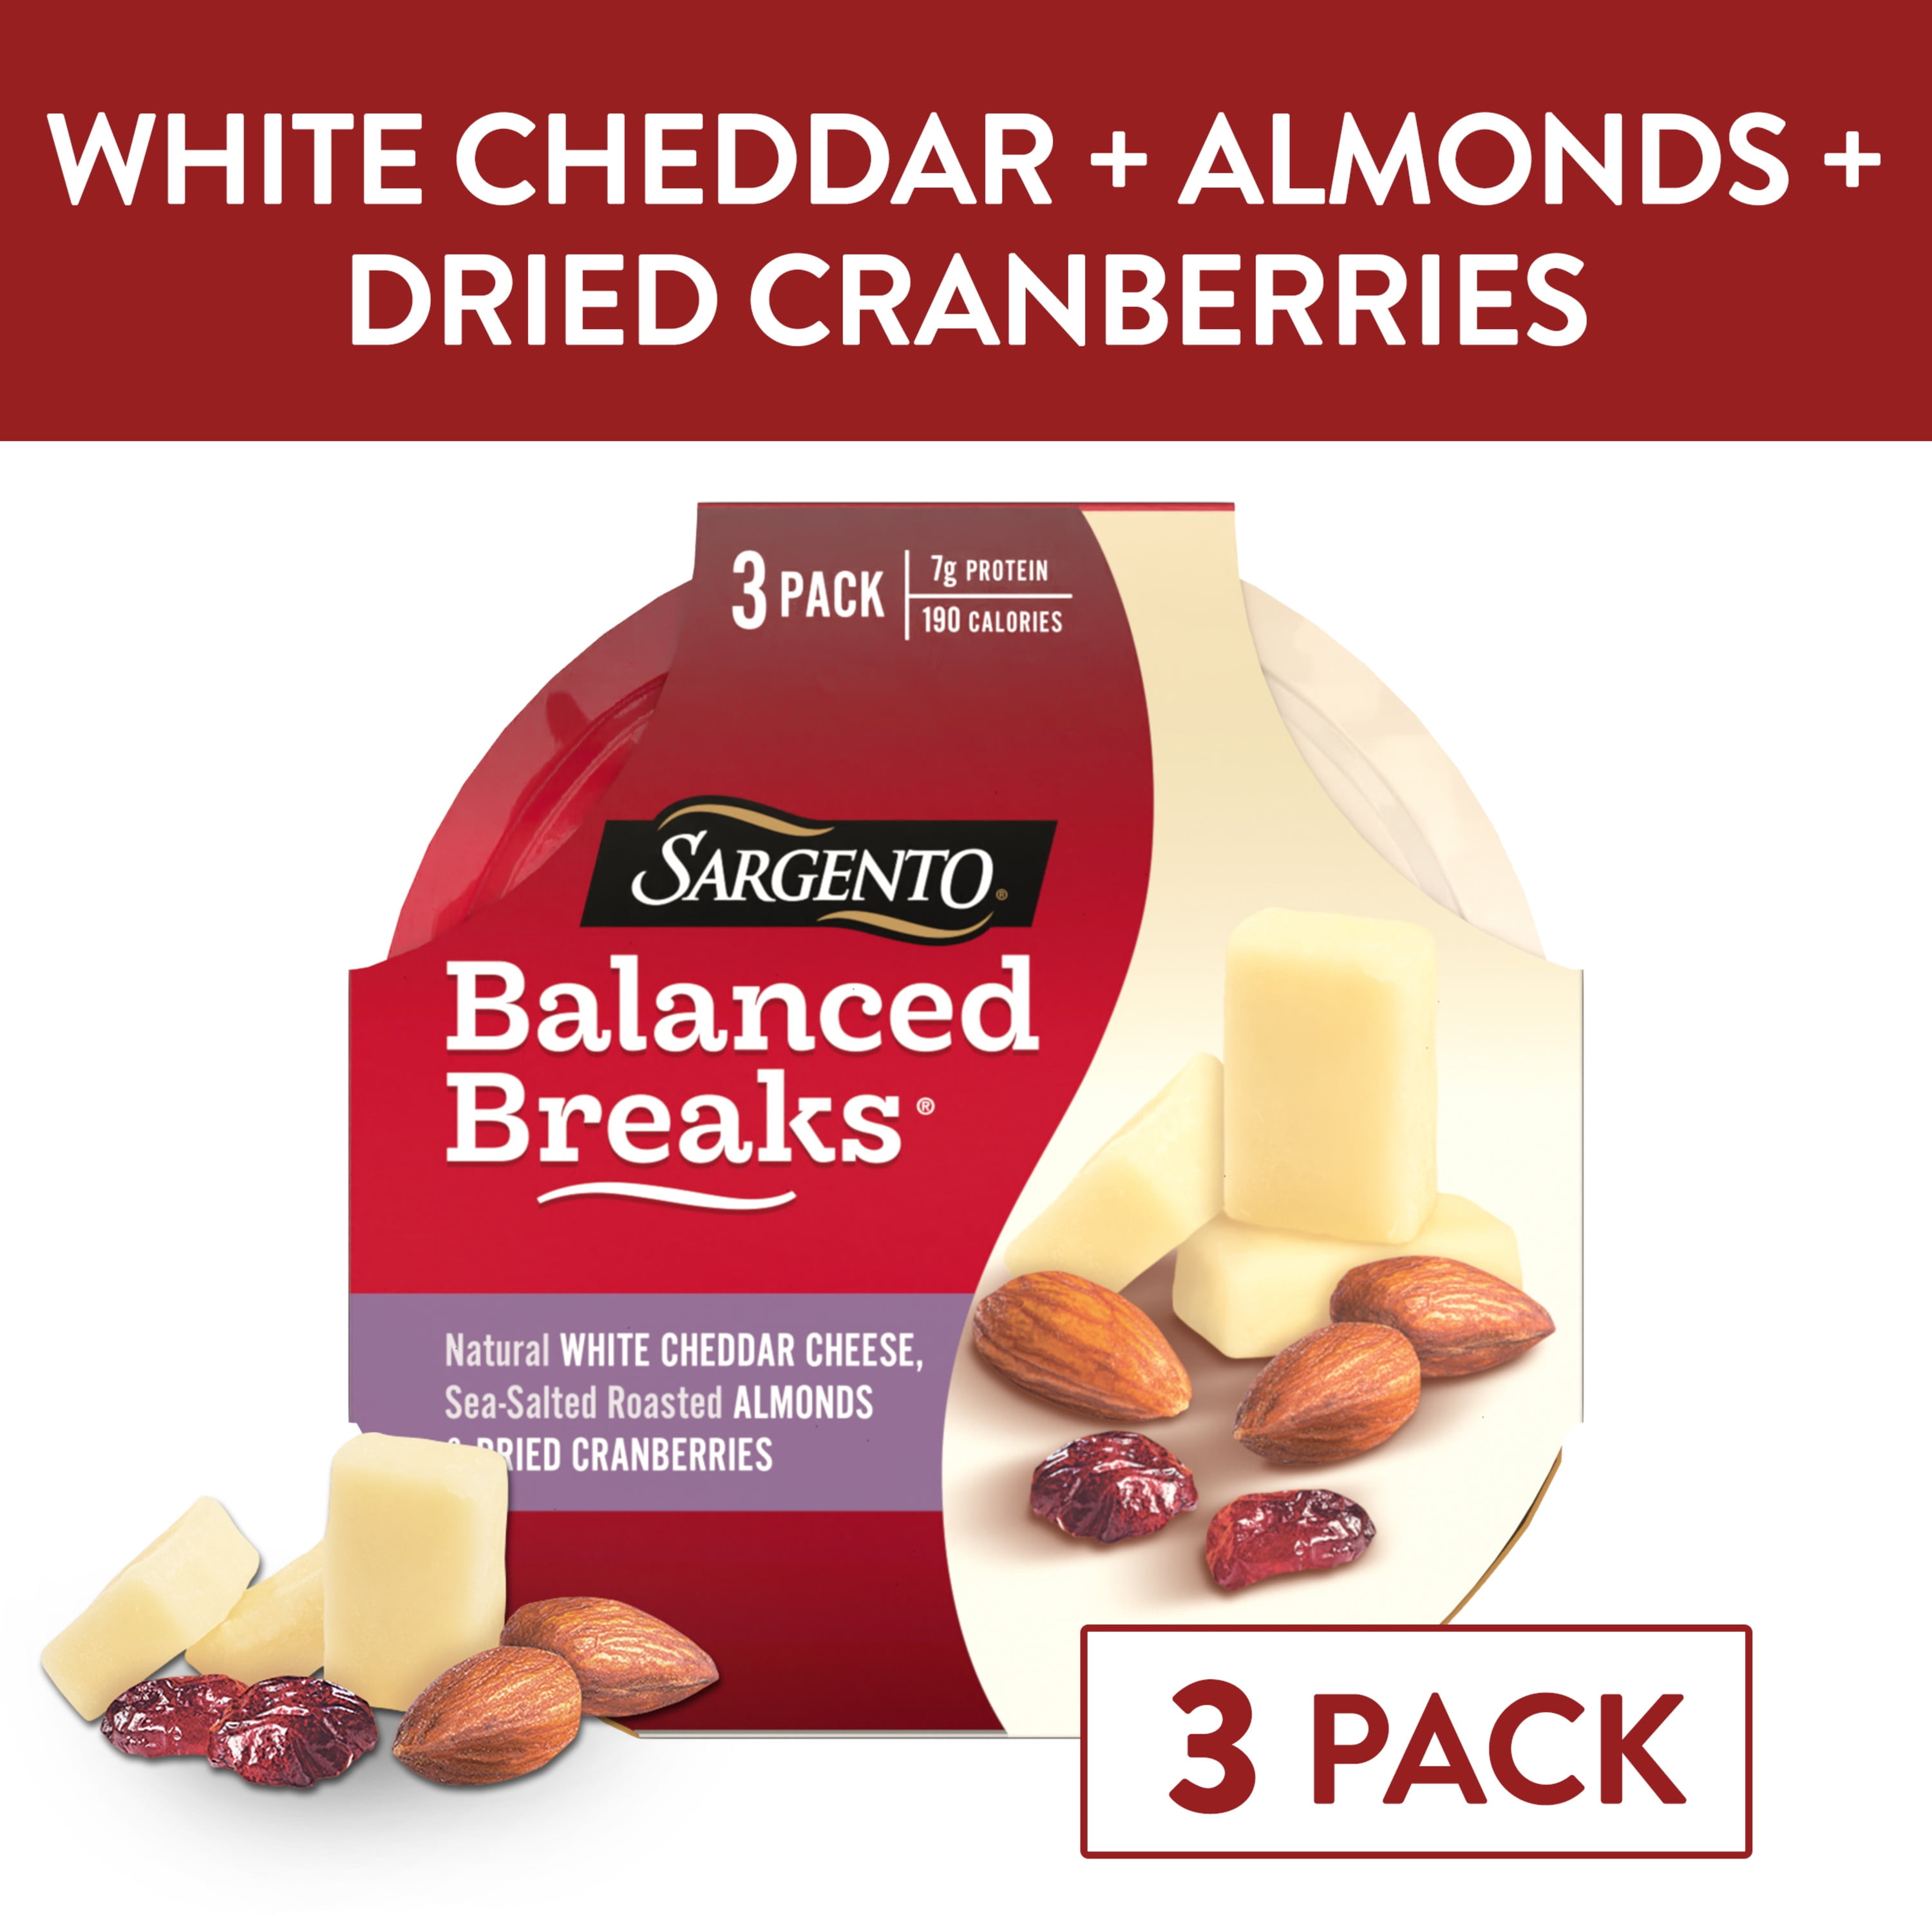 Sargento Balanced Breaks Snacks Natural White Cheddar Cheese, Sea-Salted Roasted Almonds and Dried Cranberries, 3-Pack